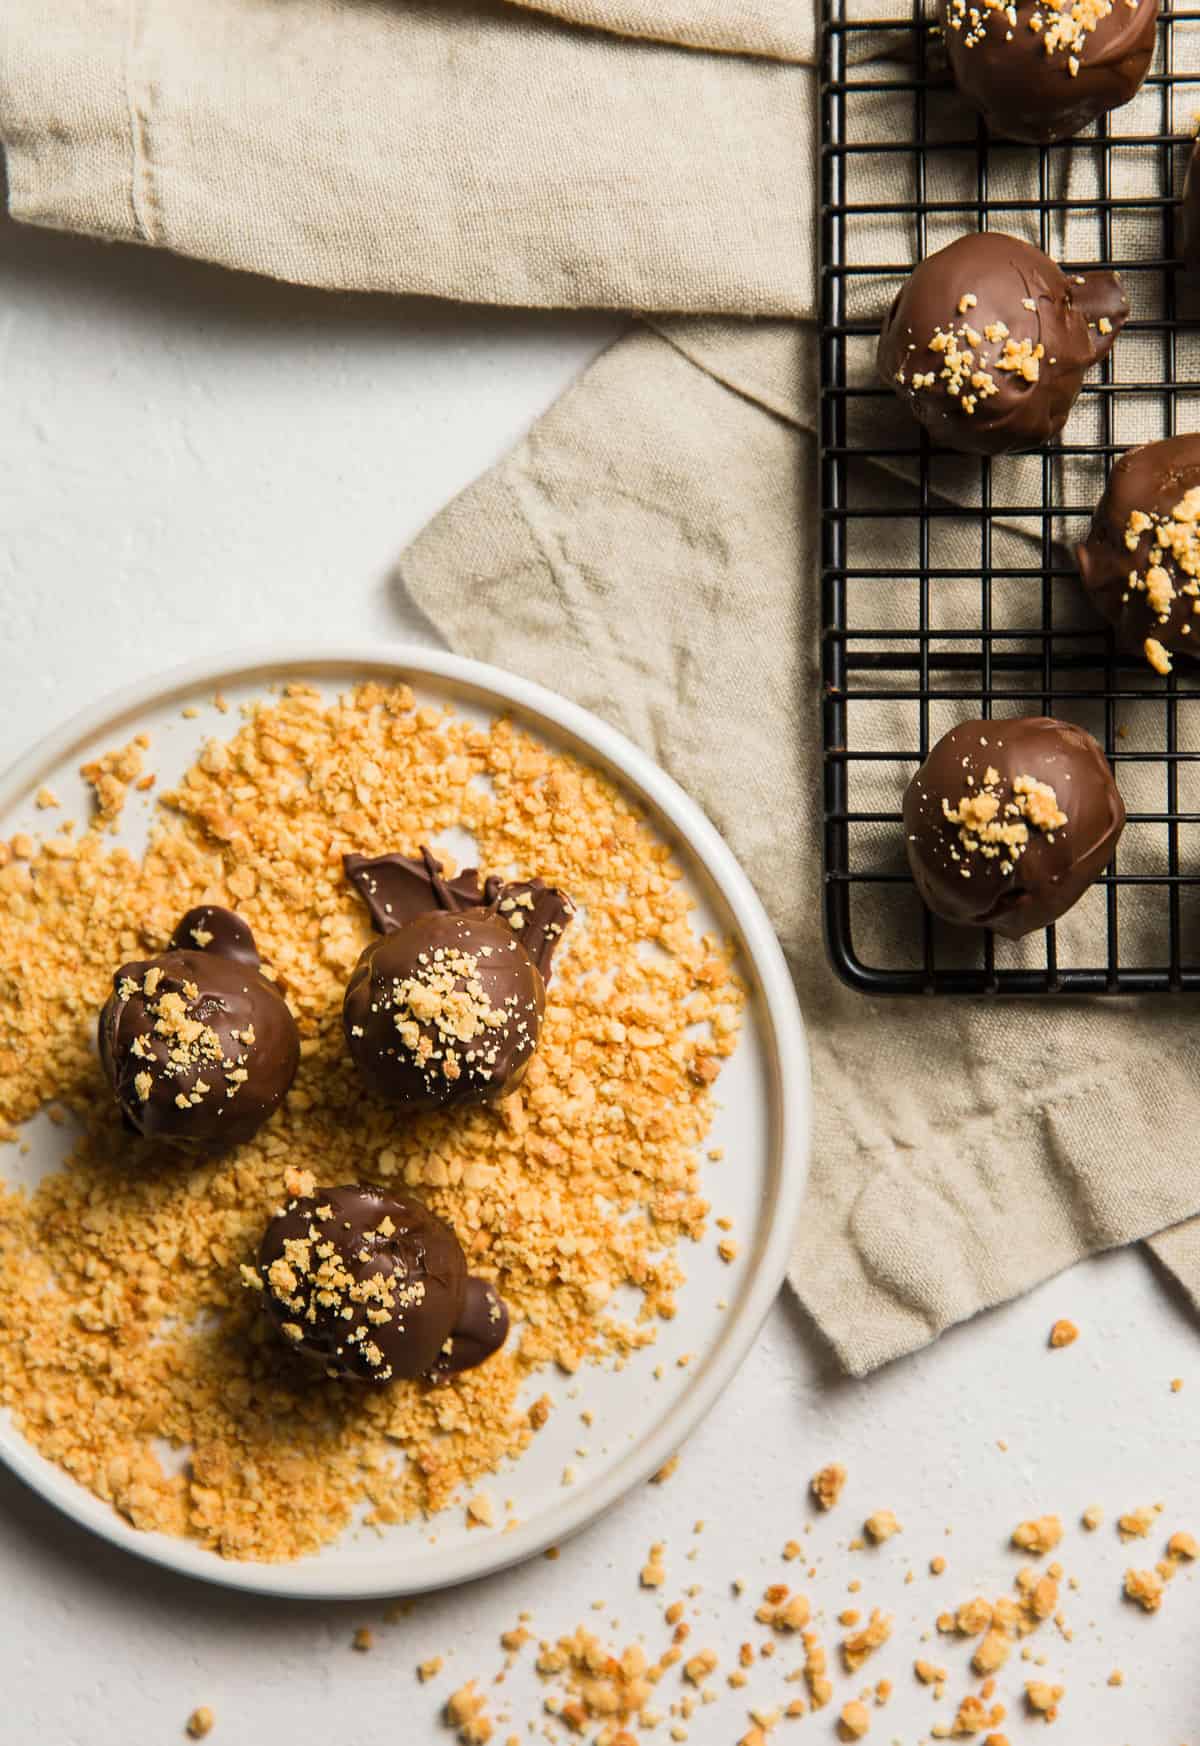 Chocolate Peanut Butter Delights, plant based, vegan, vegetarian, whole food plant based, gluten free, recipe, wfpb, healthy, healthy vegan, oil free, no refined sugar, no oil, refined sugar free, dairy free, dinner party, entertaining, dessert, sweets, treats